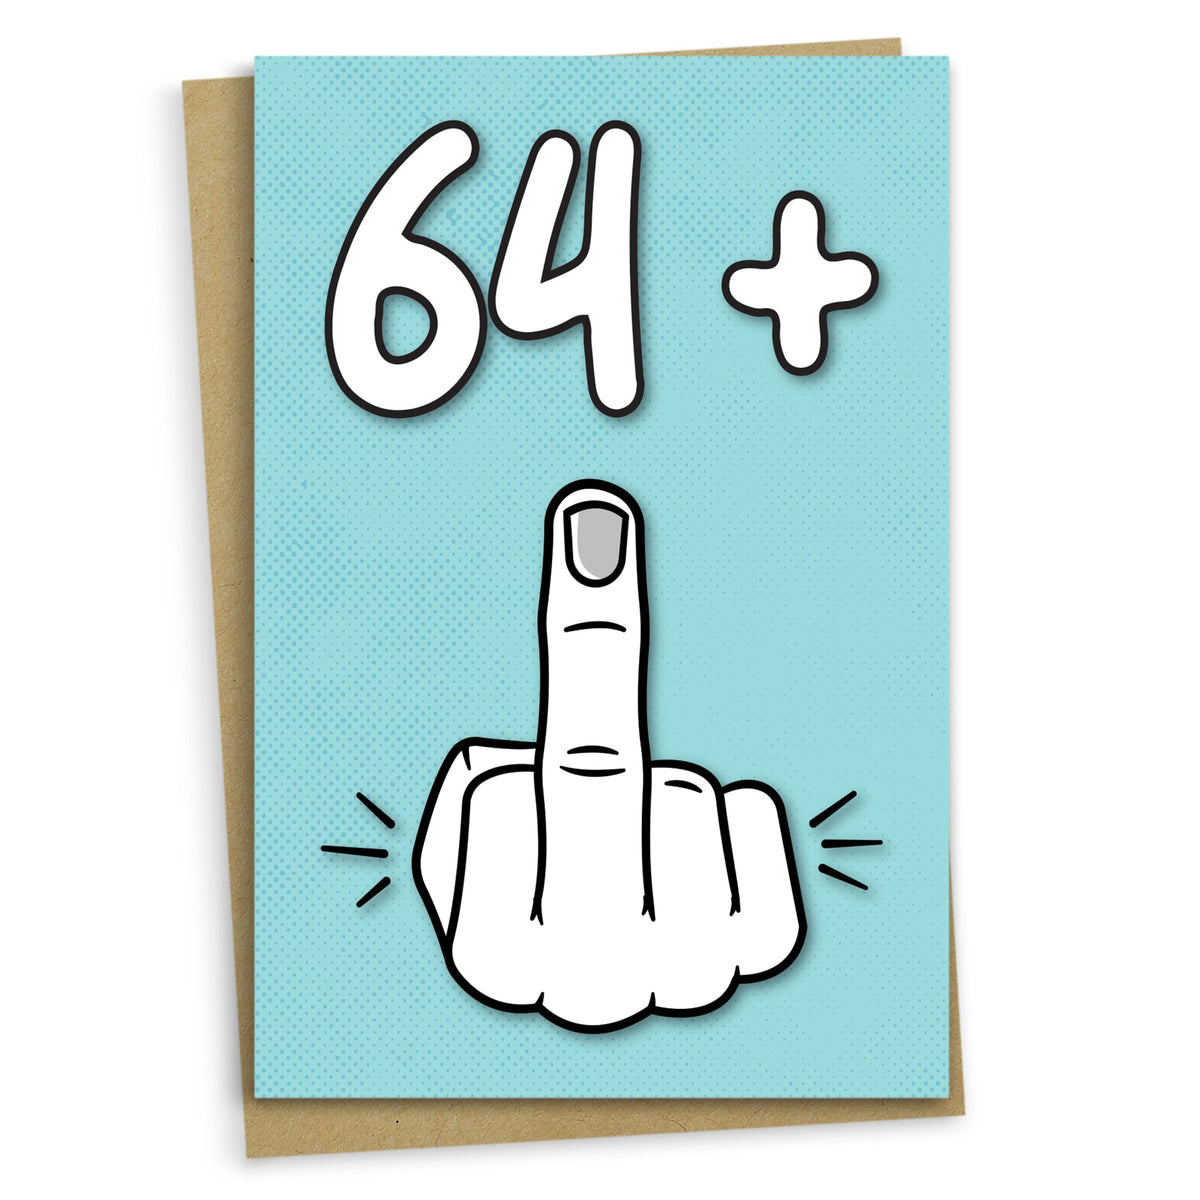 65th Birthday Card, 64 and 1, Funny Birthday Card for 65 Year Old Women or Men, 5x7